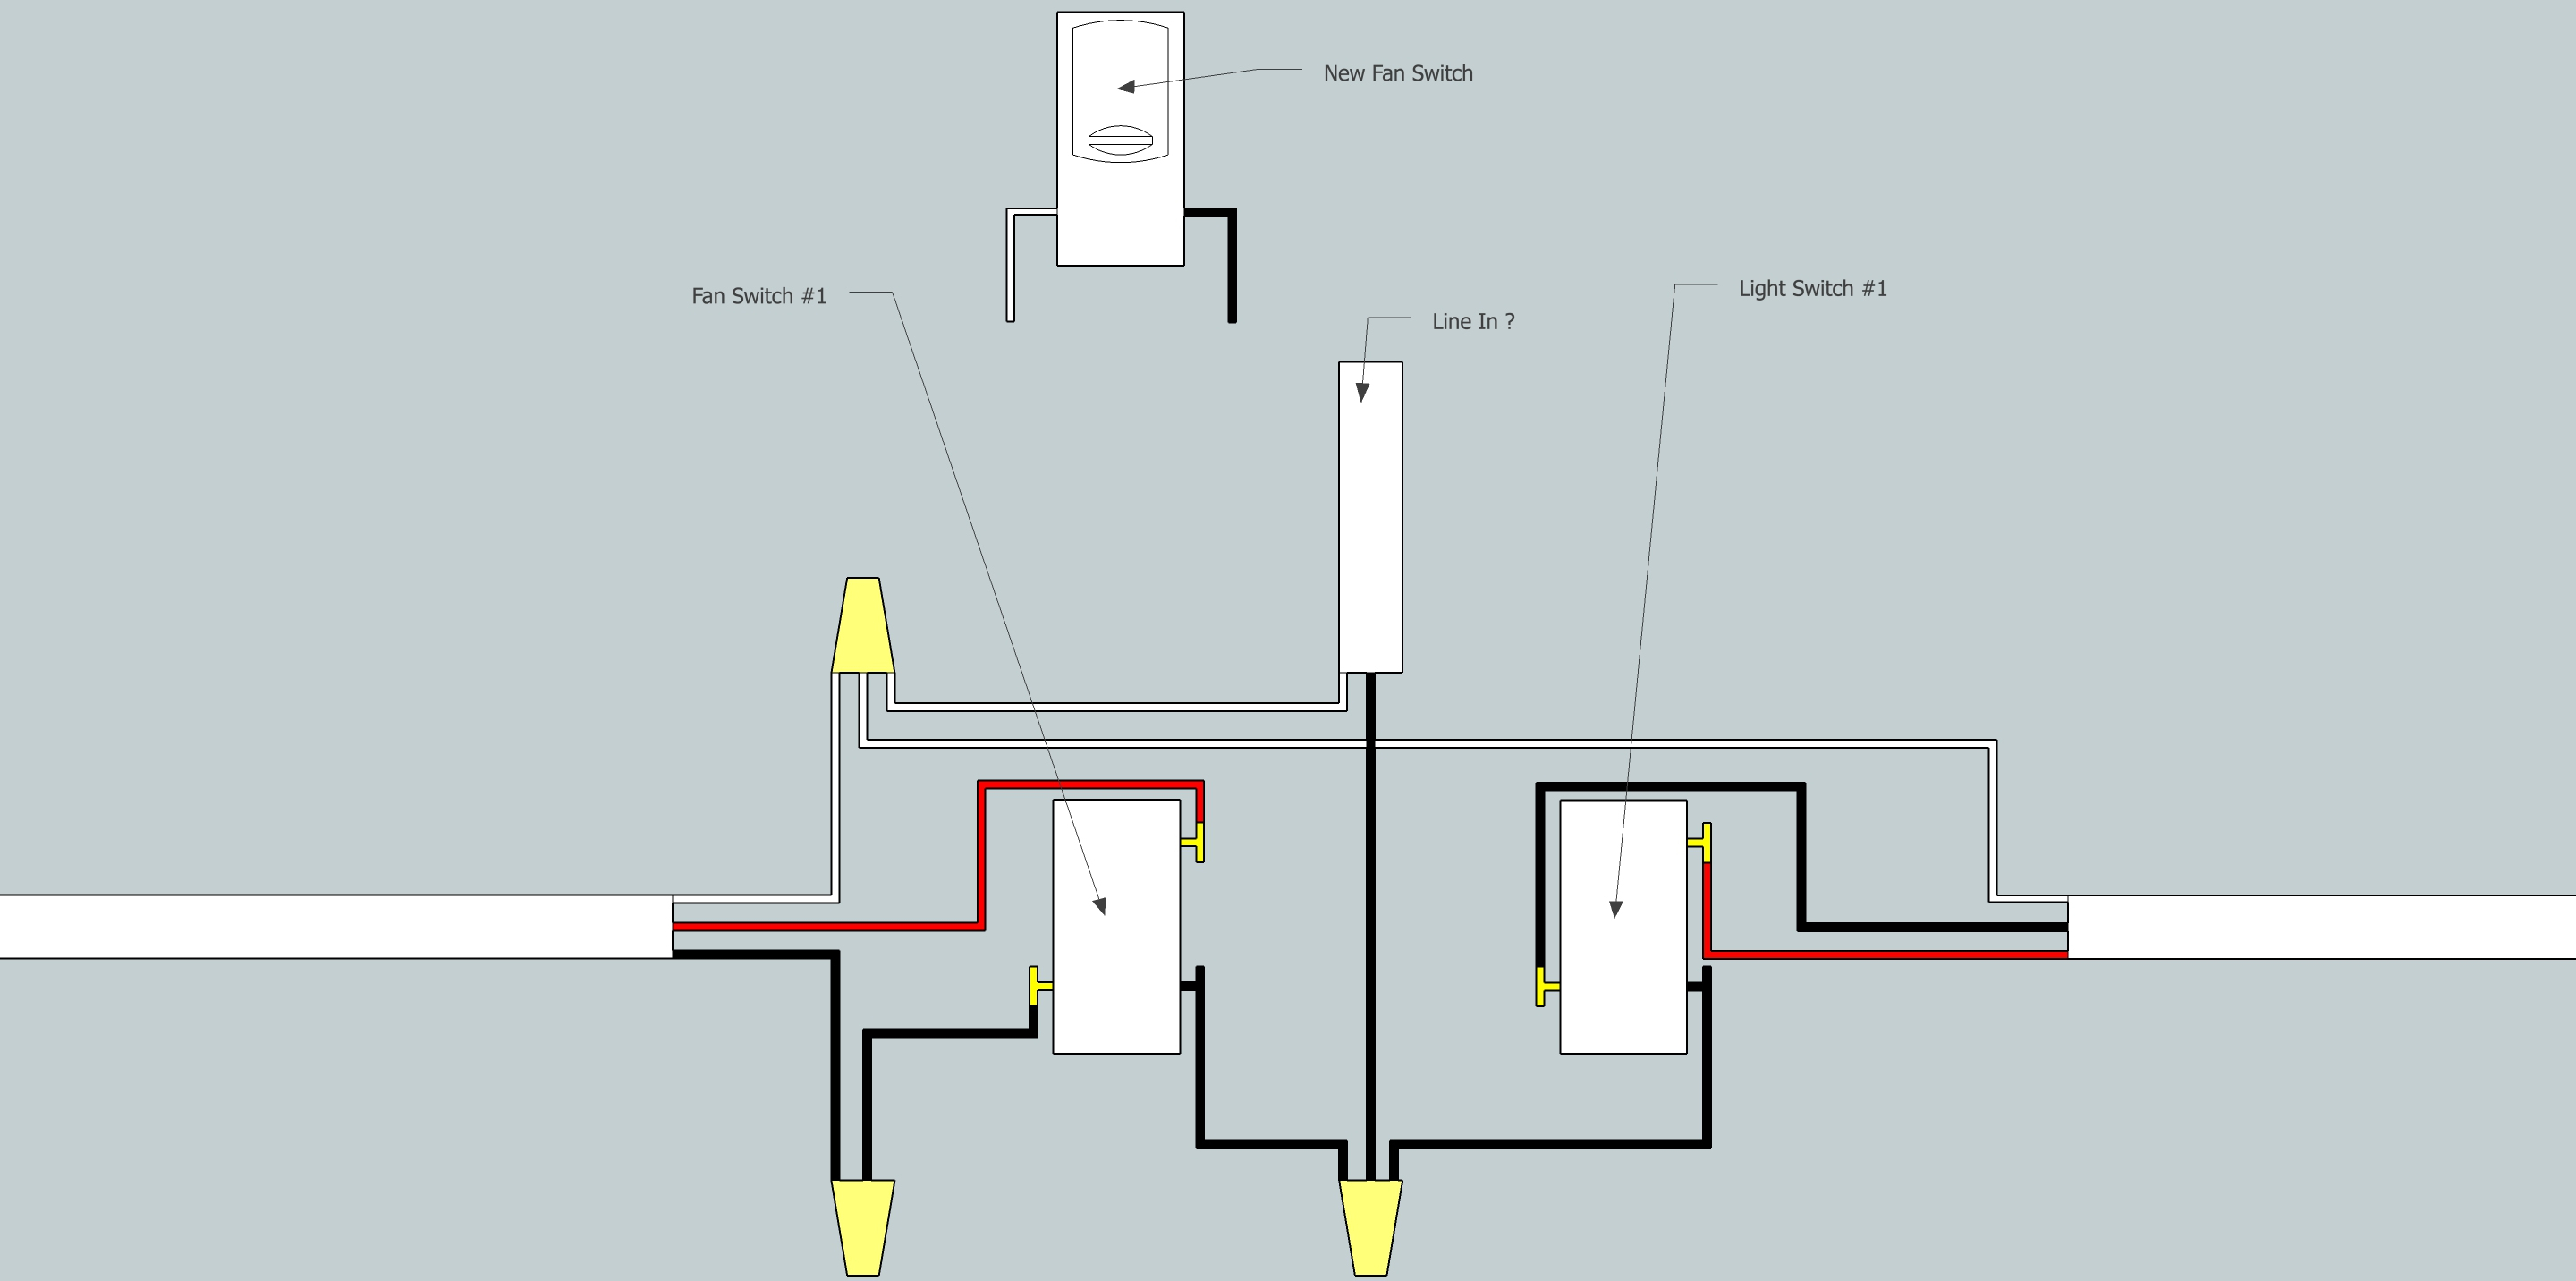 Electrical - Need Help Adding Fan To Existing 3-Way Switch Setup - Three Way Switch Wiring Diagram